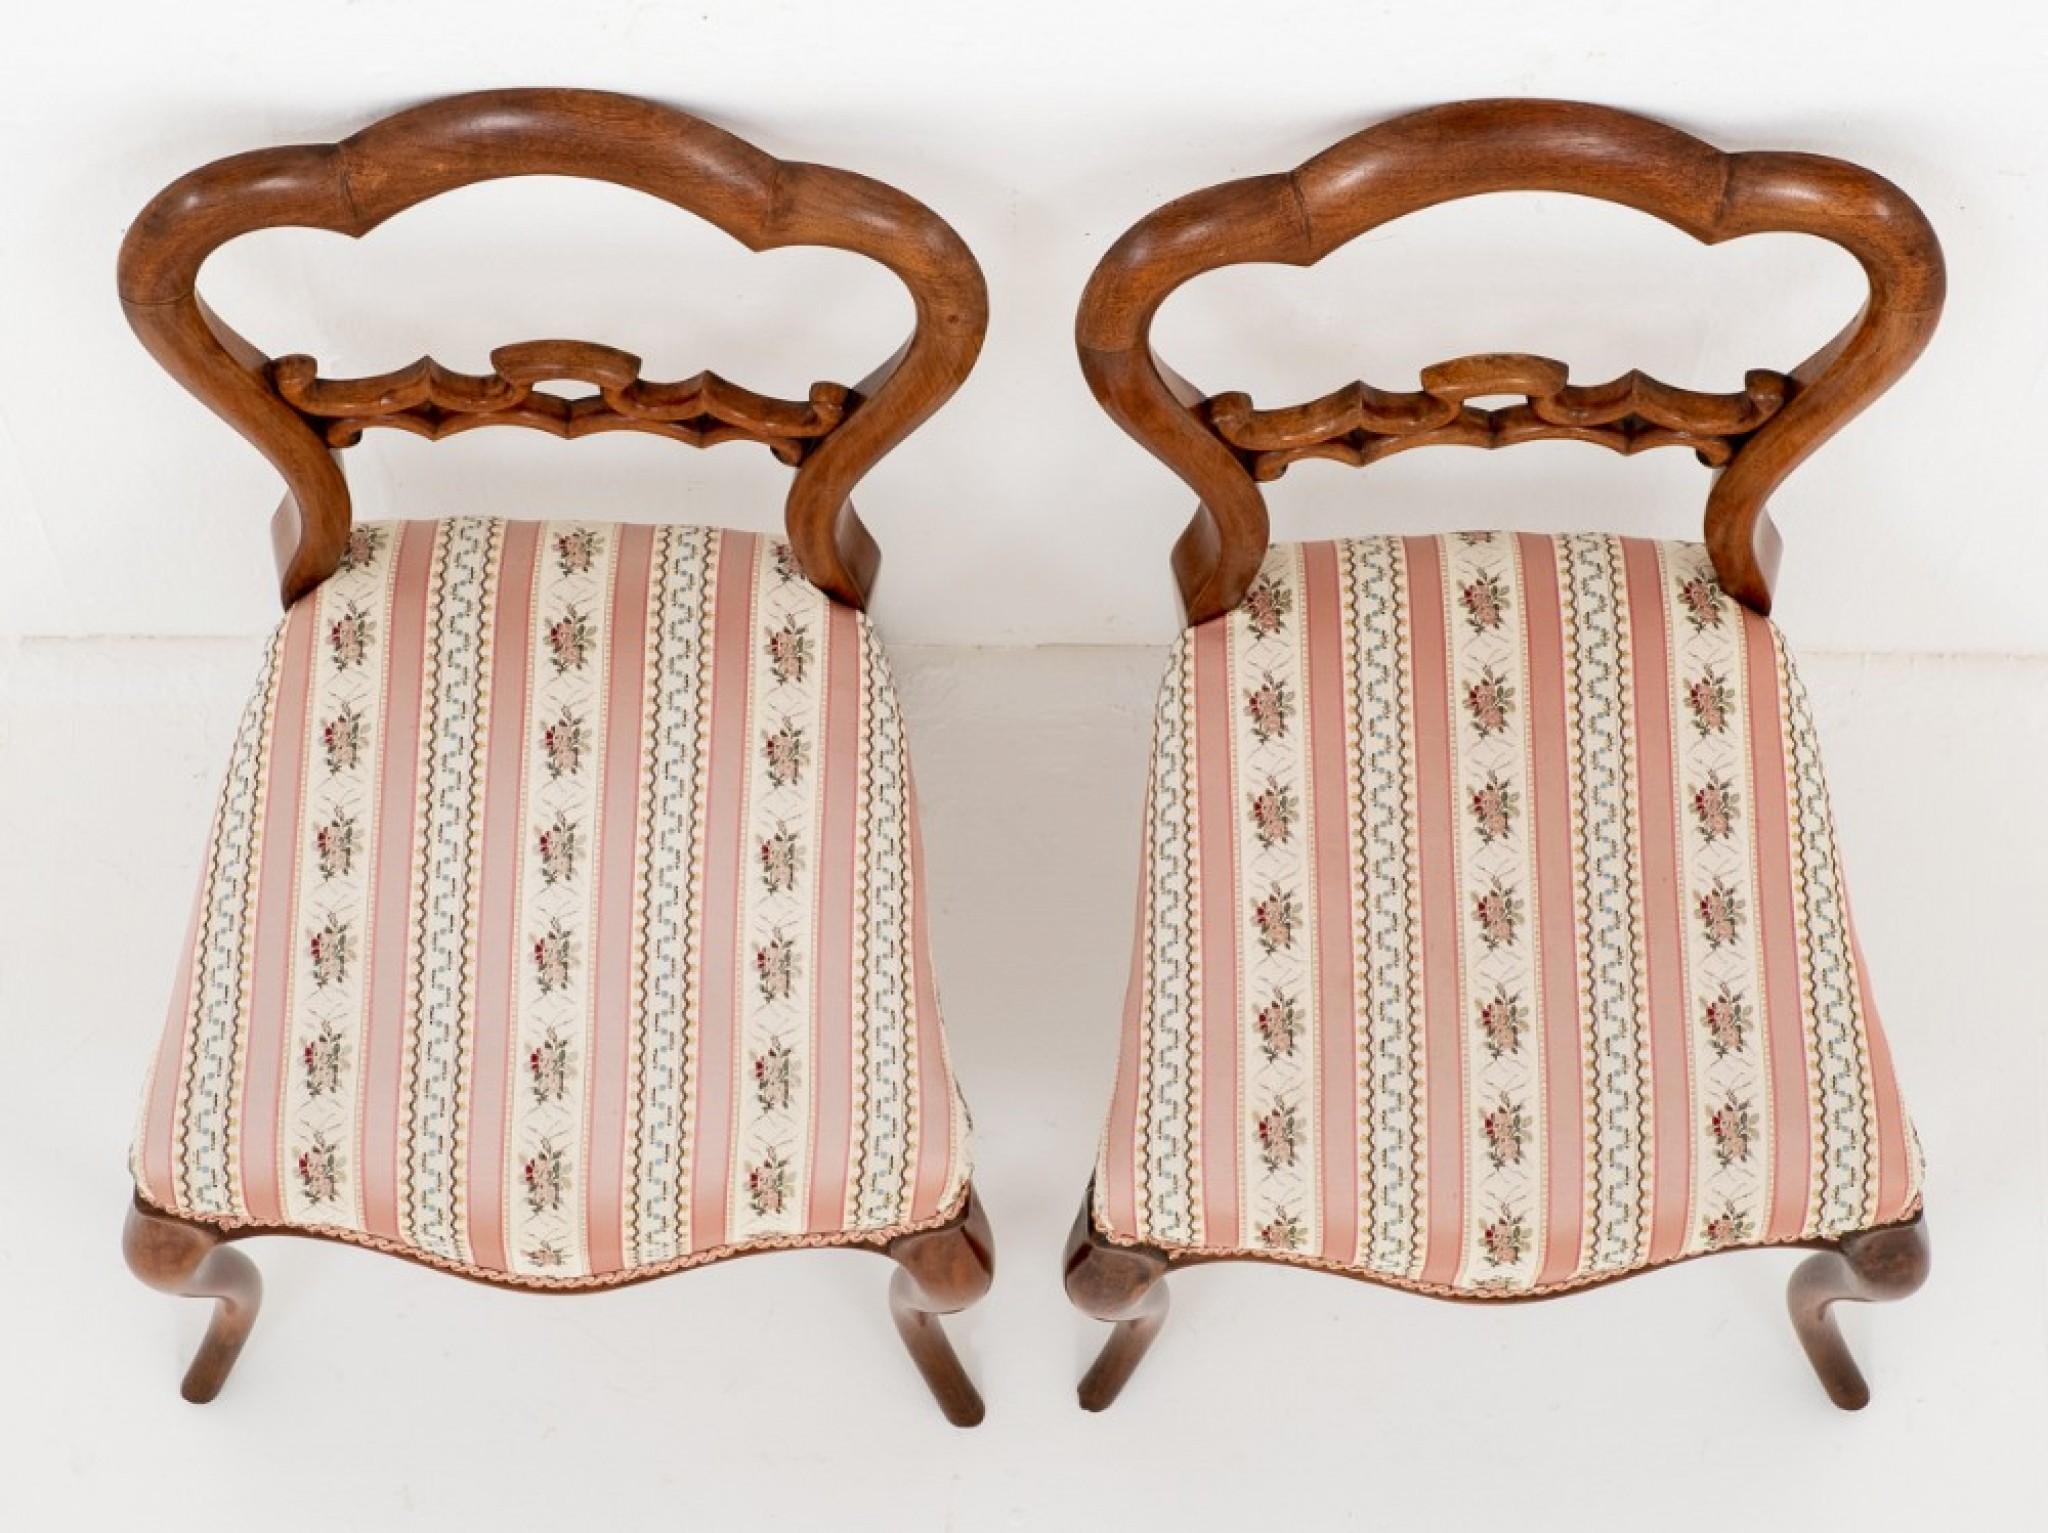 Pretty Pair of Victorian Mahogany Side Chairs.
circa 1860
Each Chair Standing on Elegant Cabriole Front Legs and Sabre Back Legs.
The Chairs Having Stuff over Seats covered in a pretty pink fabric.
The backs of the chairs Feature a Carved and